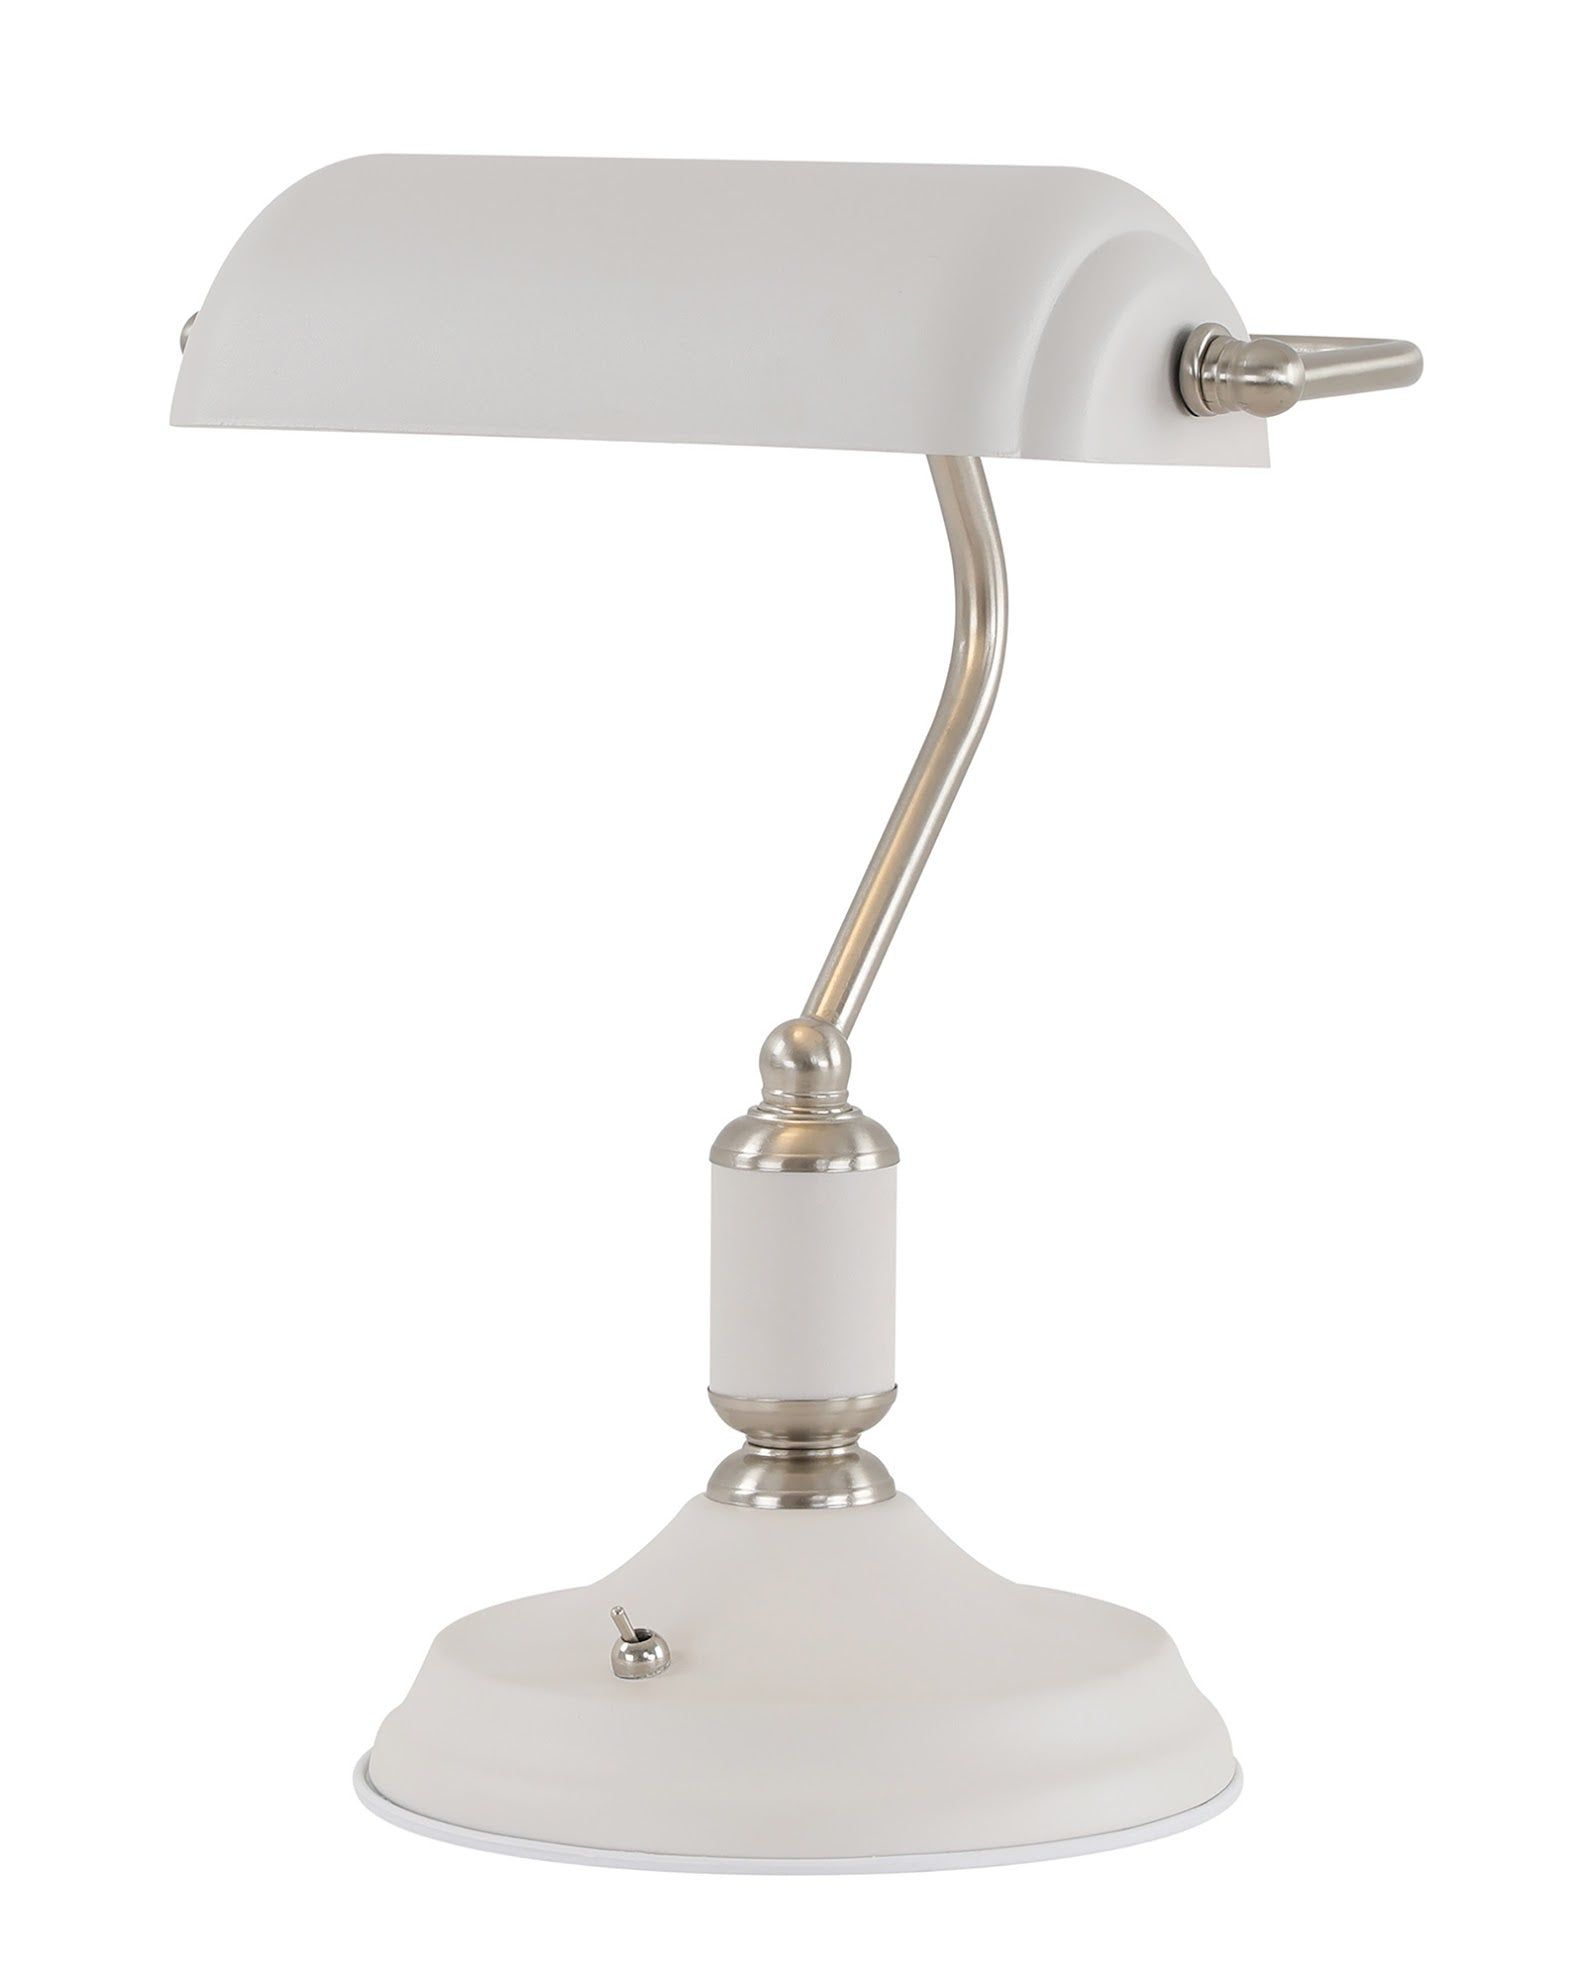 Ietson Table Lamp 1 Light With Toggle Switch, Satin Nickel/Sand White